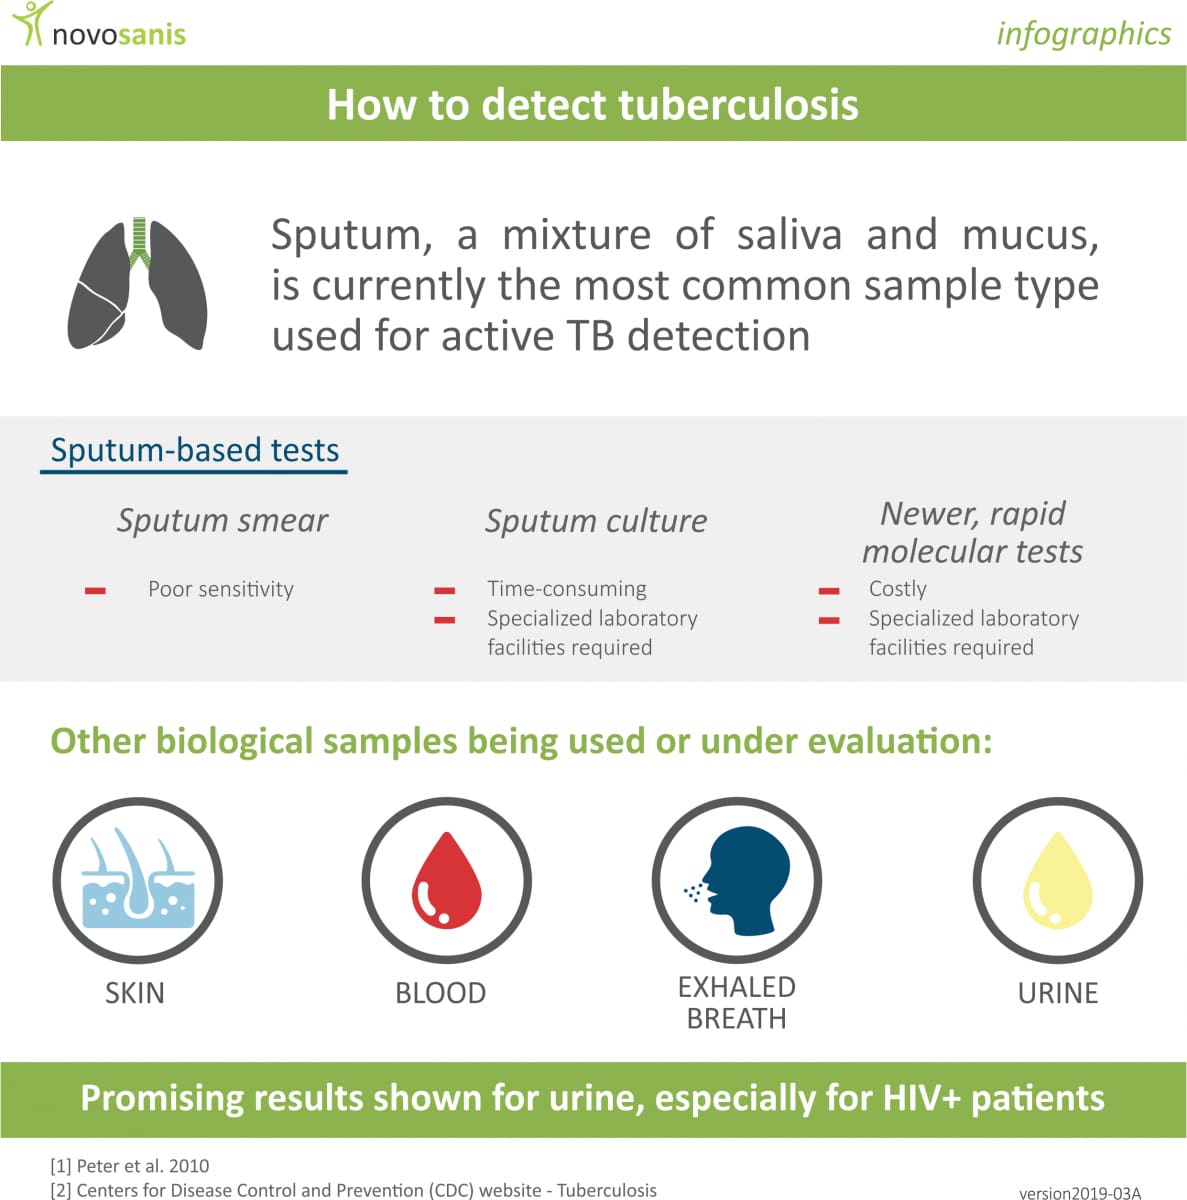 How to detect tuberculosis (infographic)